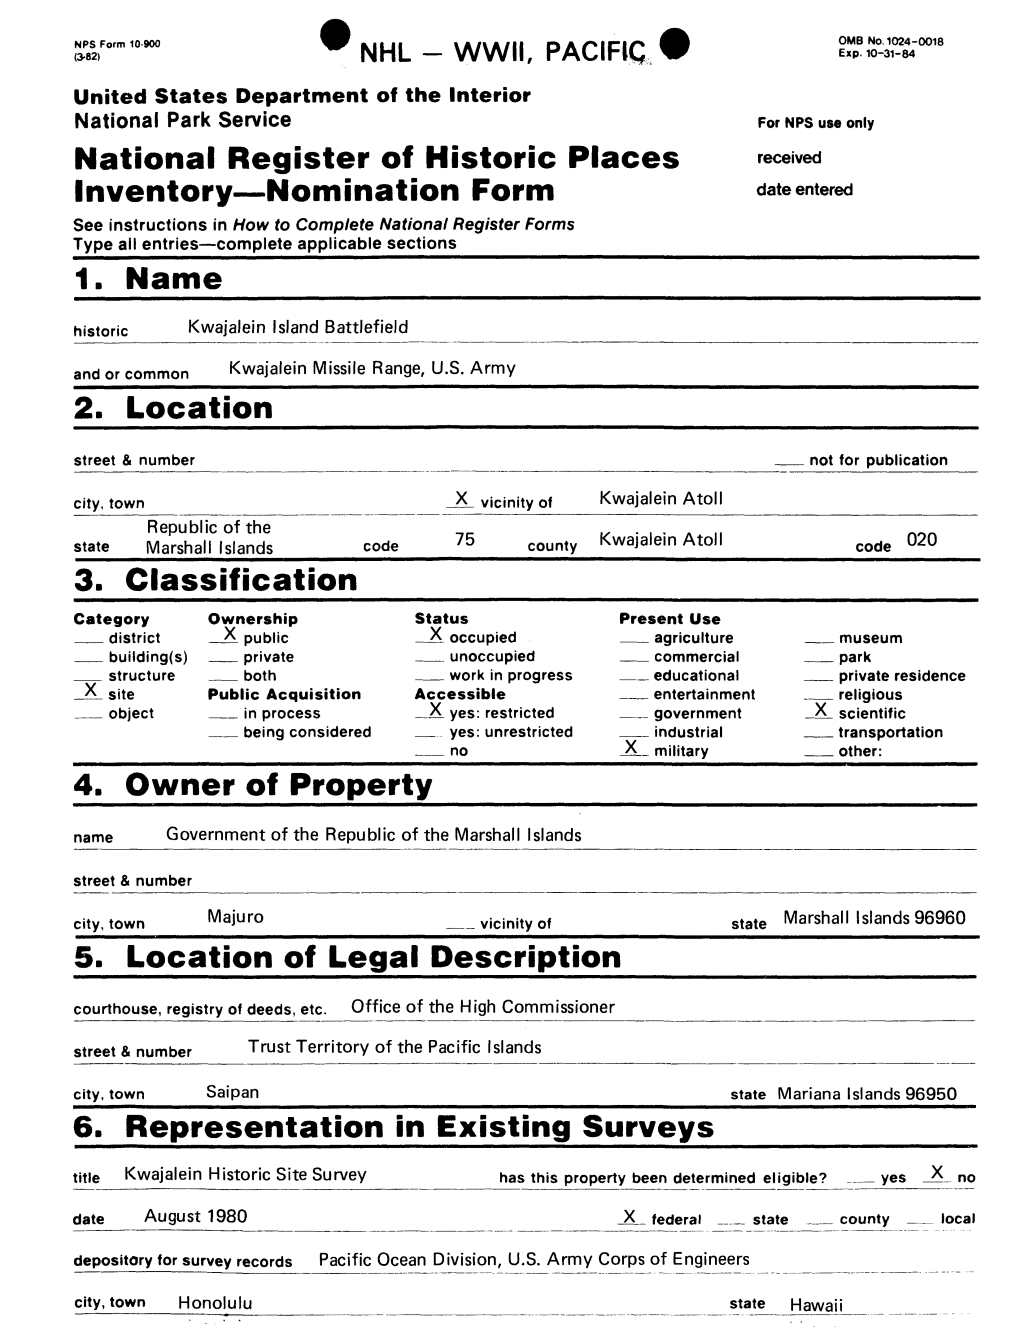 National Register of Historic Places Inventory — Nomination Form Date Entered 1. Name 2. Location 3. Classification 4. Owner O